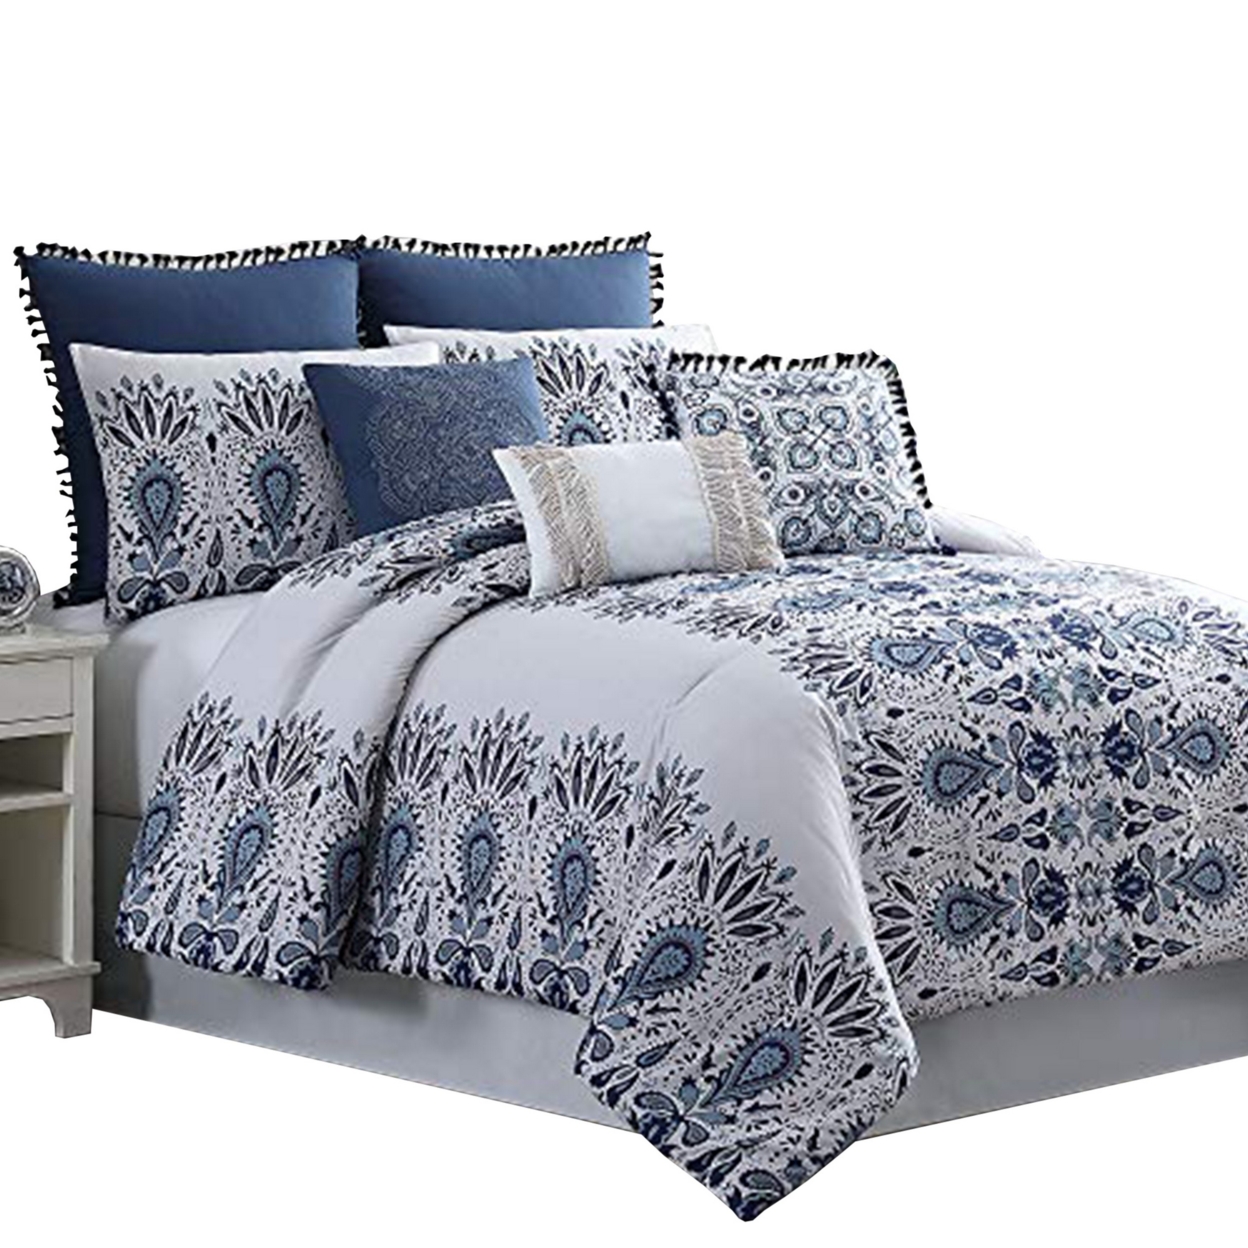 Constanta 8 Piece Queen Comforter Set With Floral Print The Urban Port,Blue And White- Saltoro Sherpi